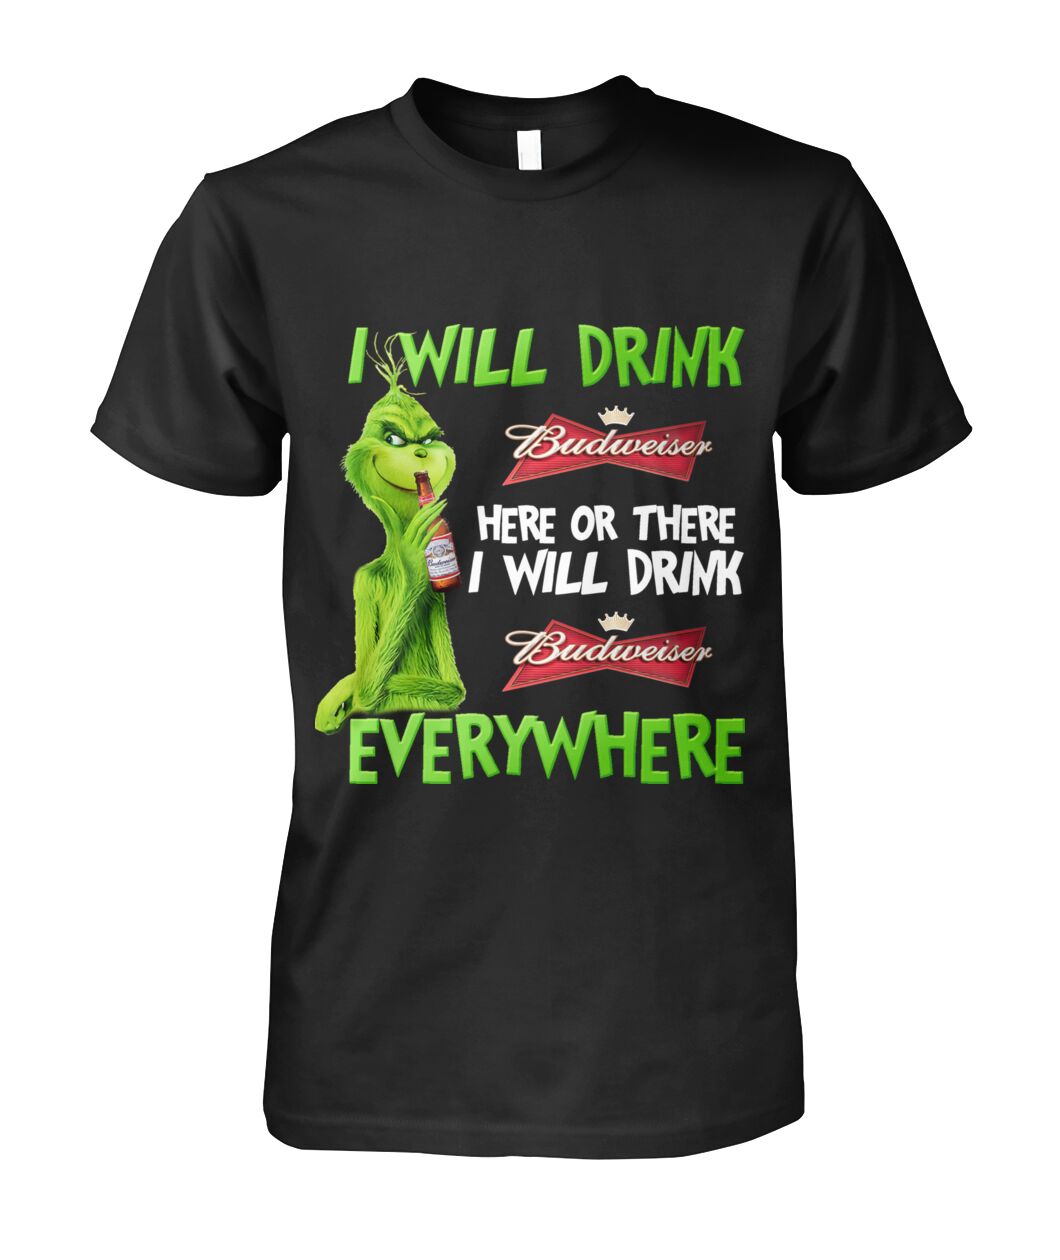 Grinch I will drink budweiser here or there i will drink budweiser everywhere shirt hoodie 1